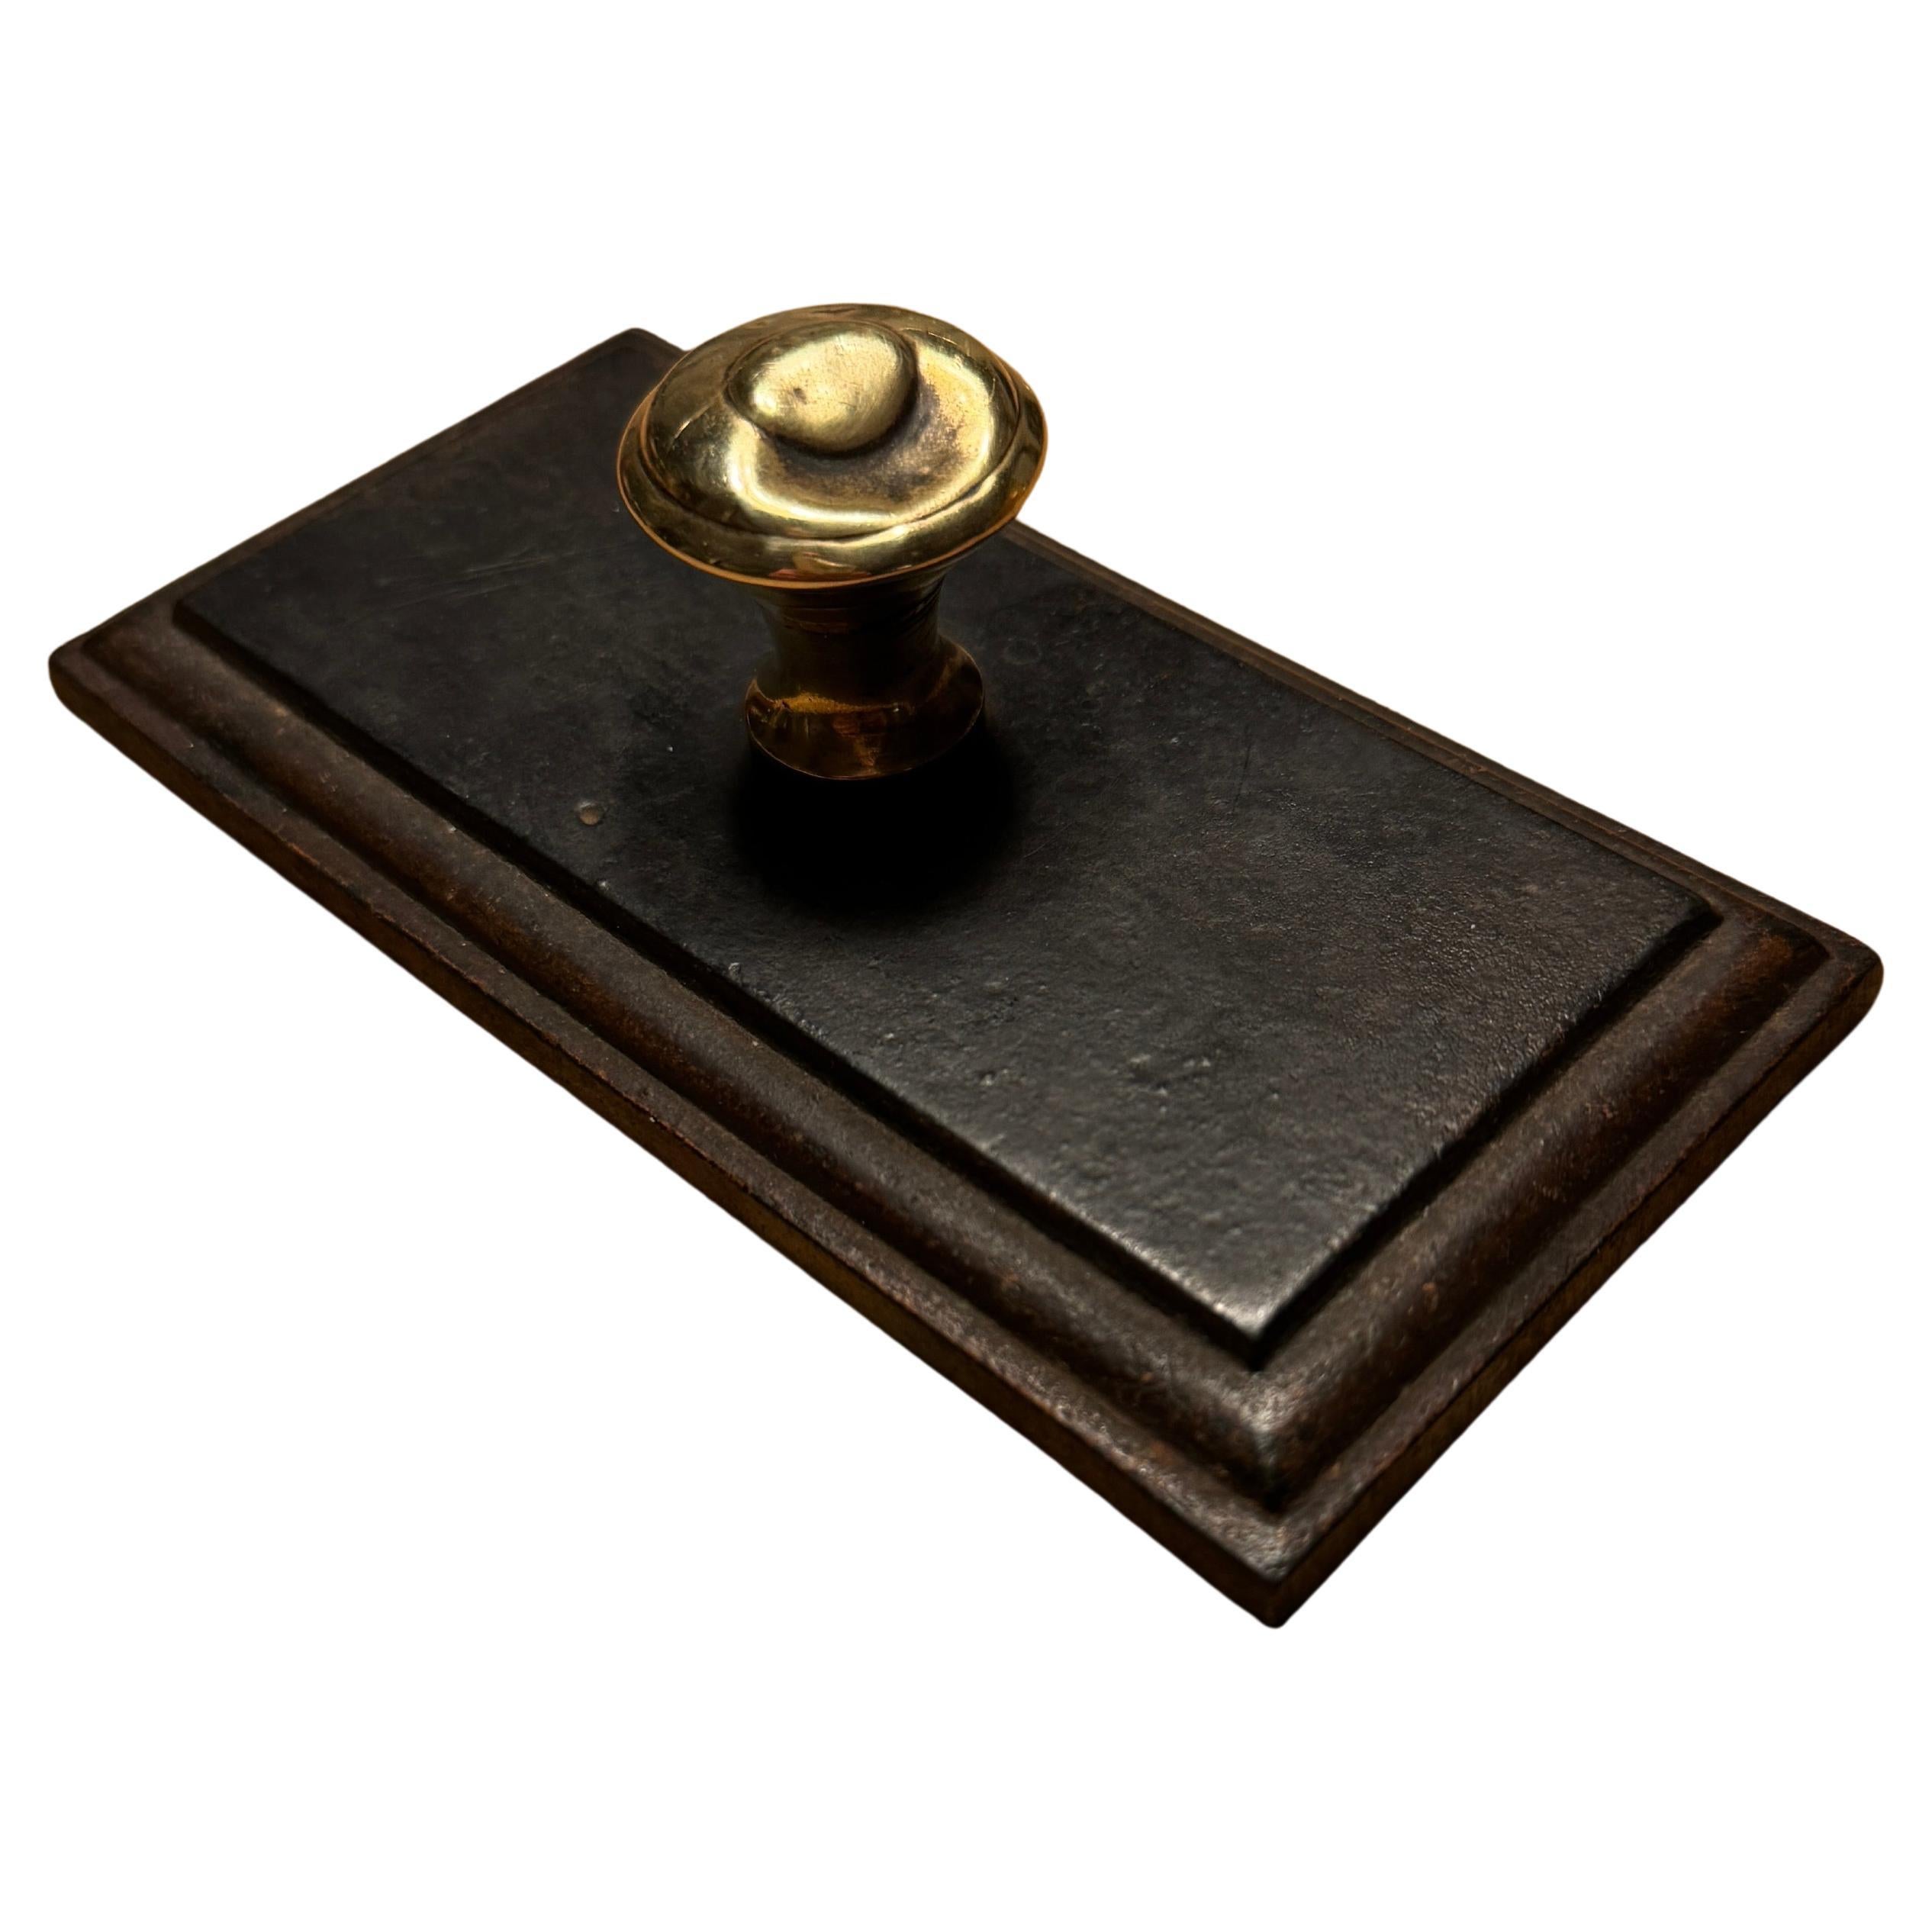 Rectangular Solid Bevelled Iron and Brass Knob Paper Weight, Mid 19th Century.
This truly charming Victorian desk accessory is very decorative and functional. 